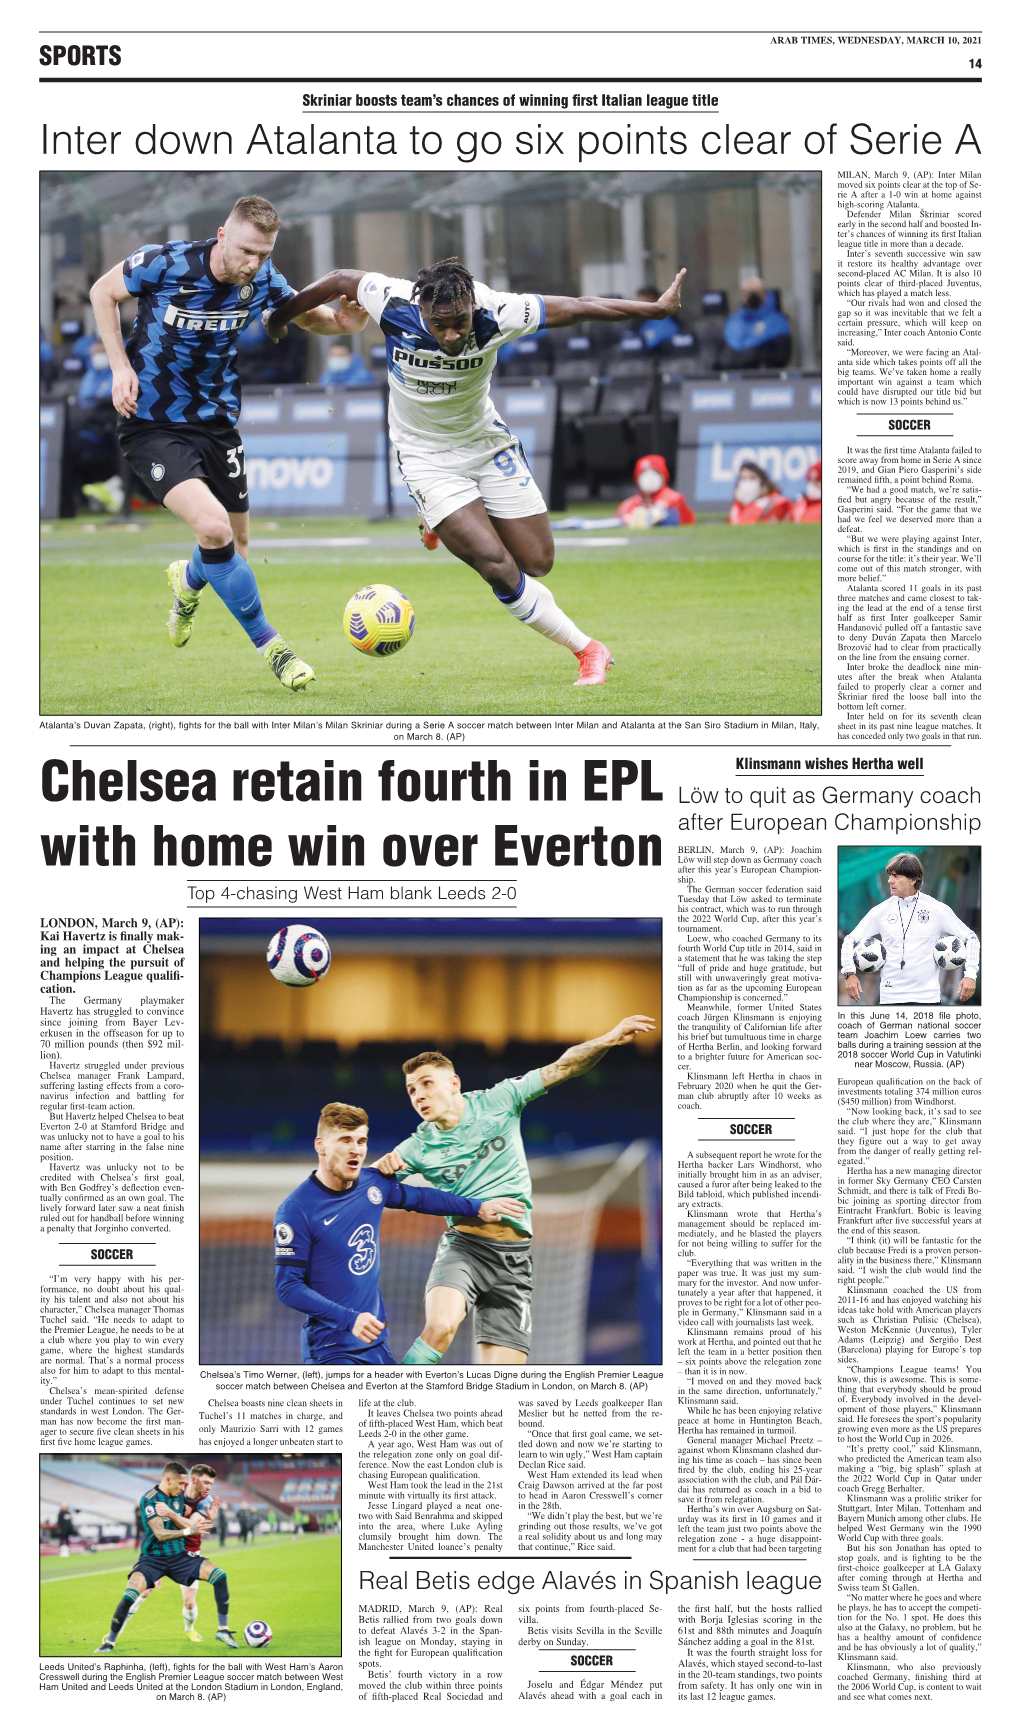 Chelsea Retain Fourth in EPL with Home Win Over Everton